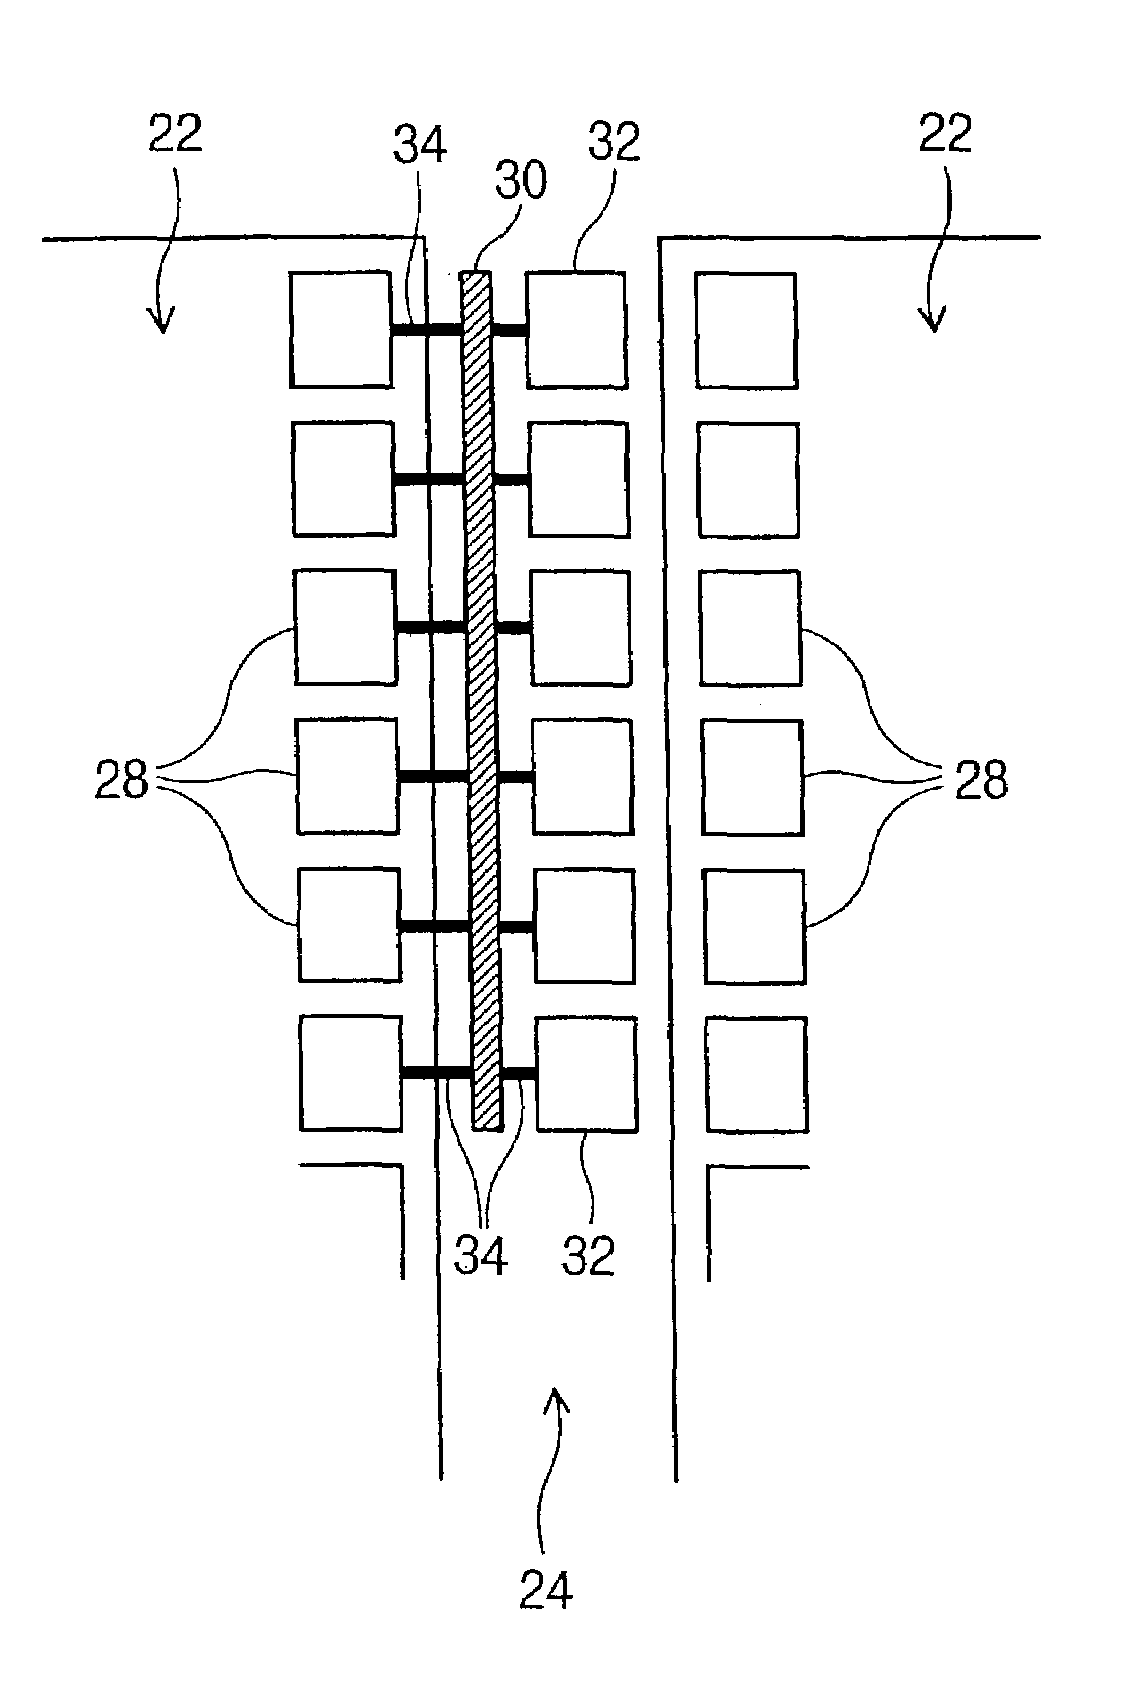 Semiconductor device having test element groups